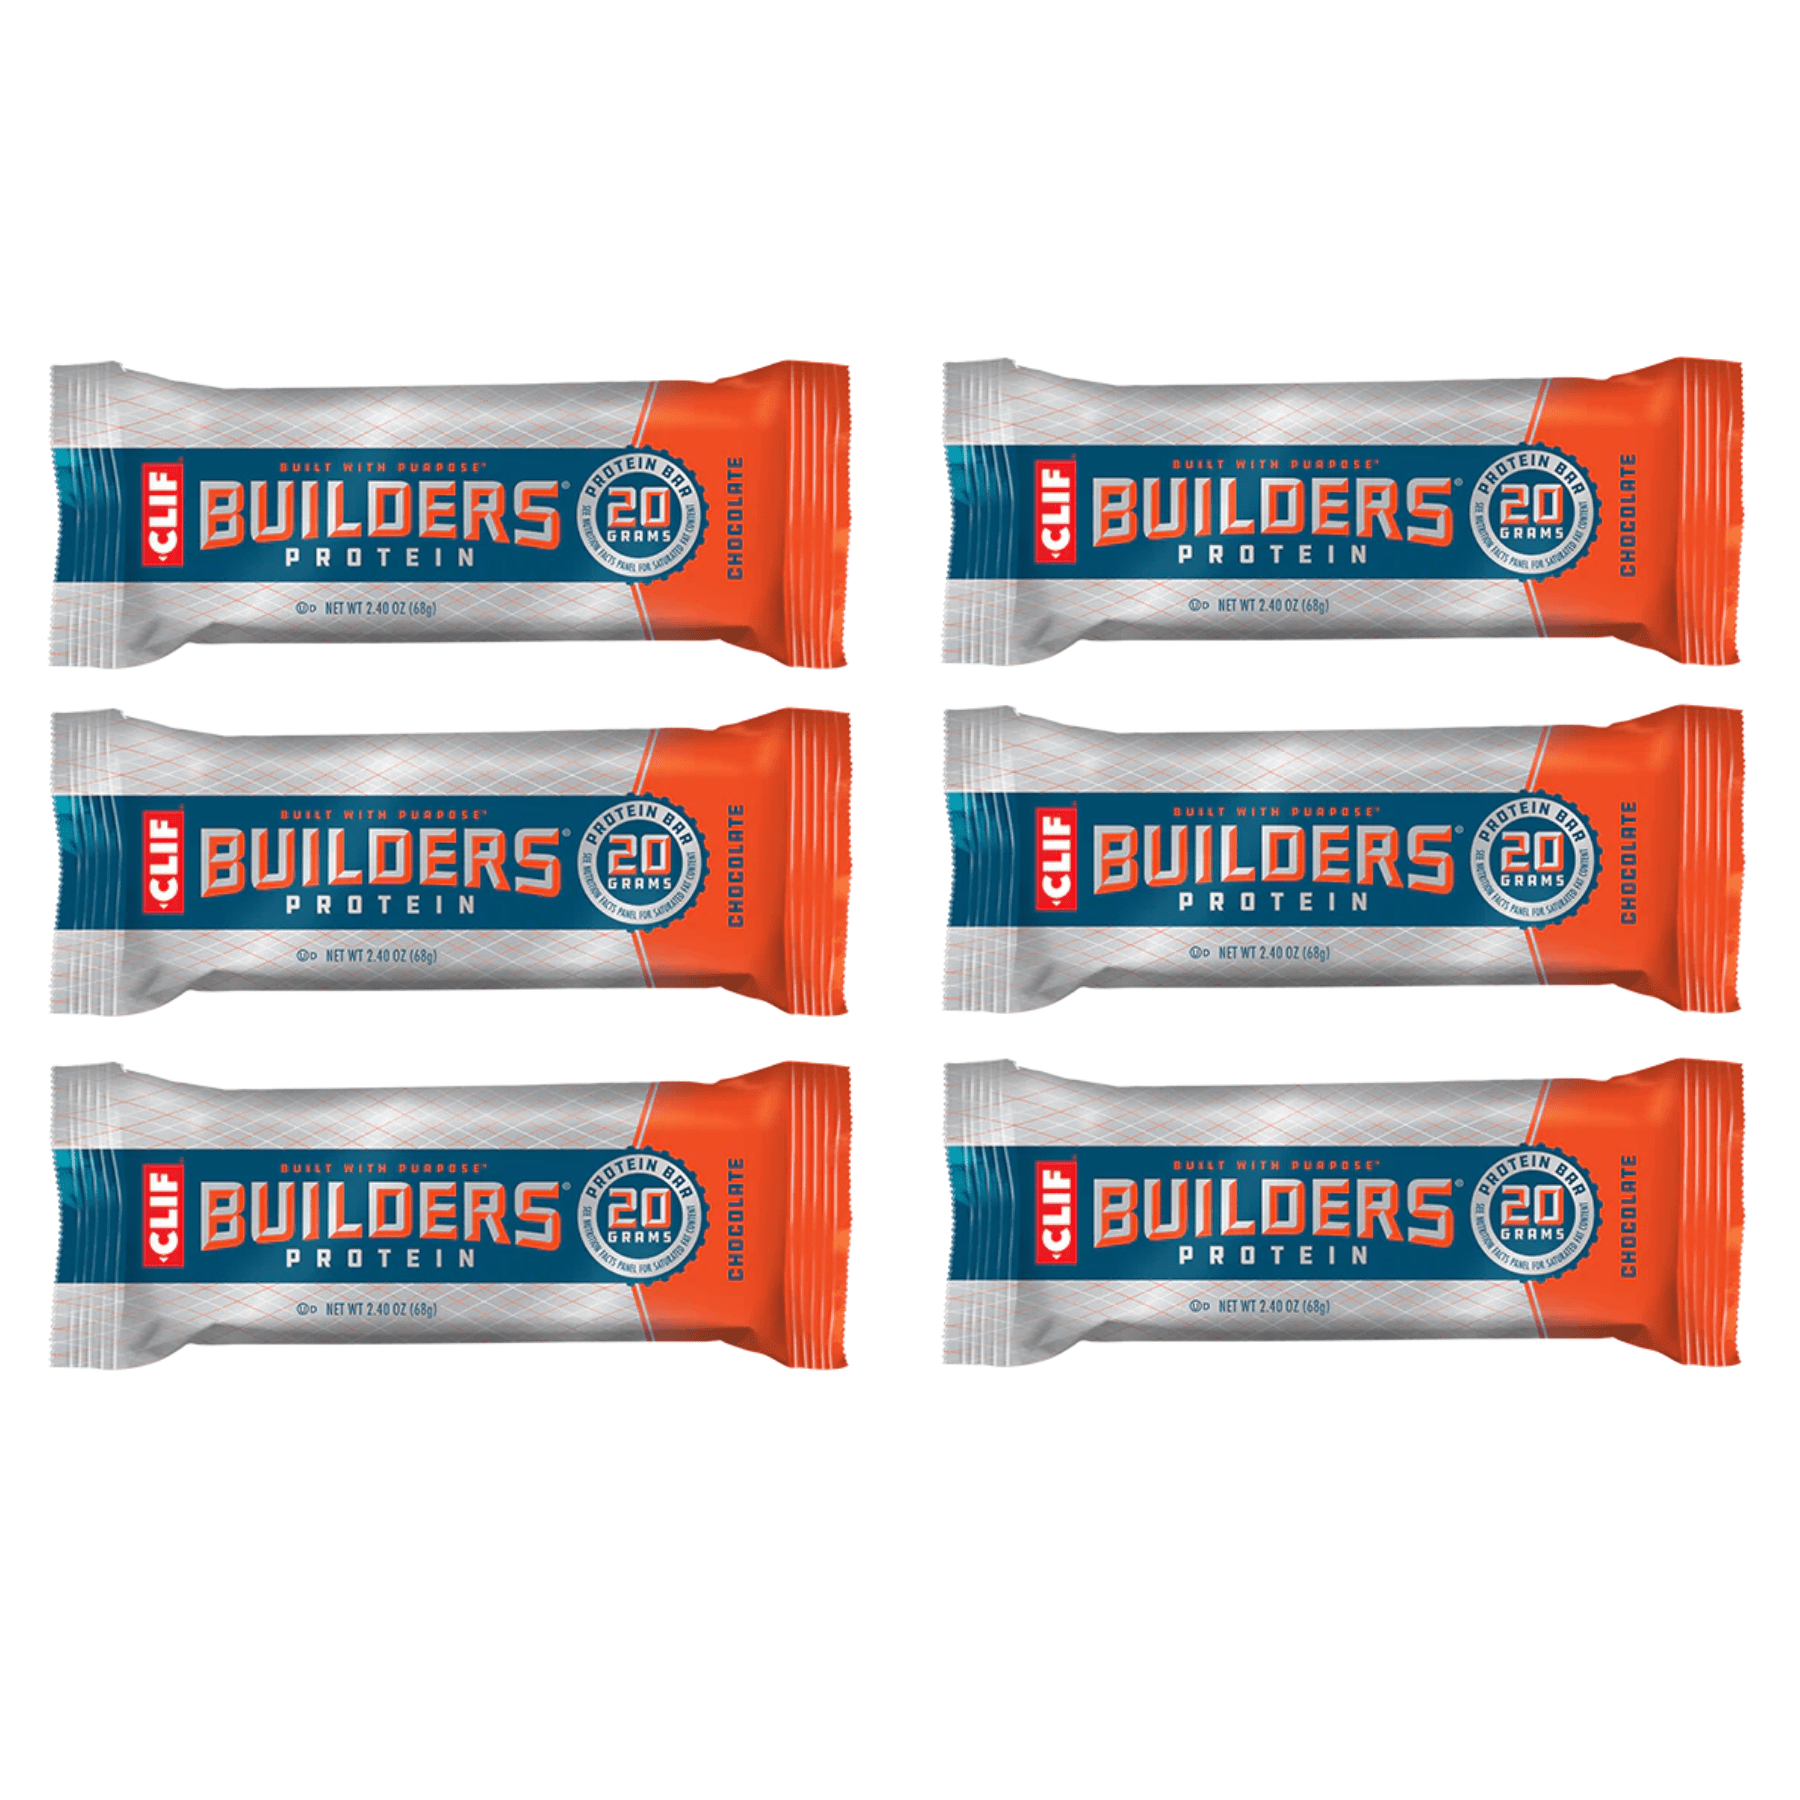 clif Energy Bar 6 / Chocolate Builders Protein Bar CLIF316